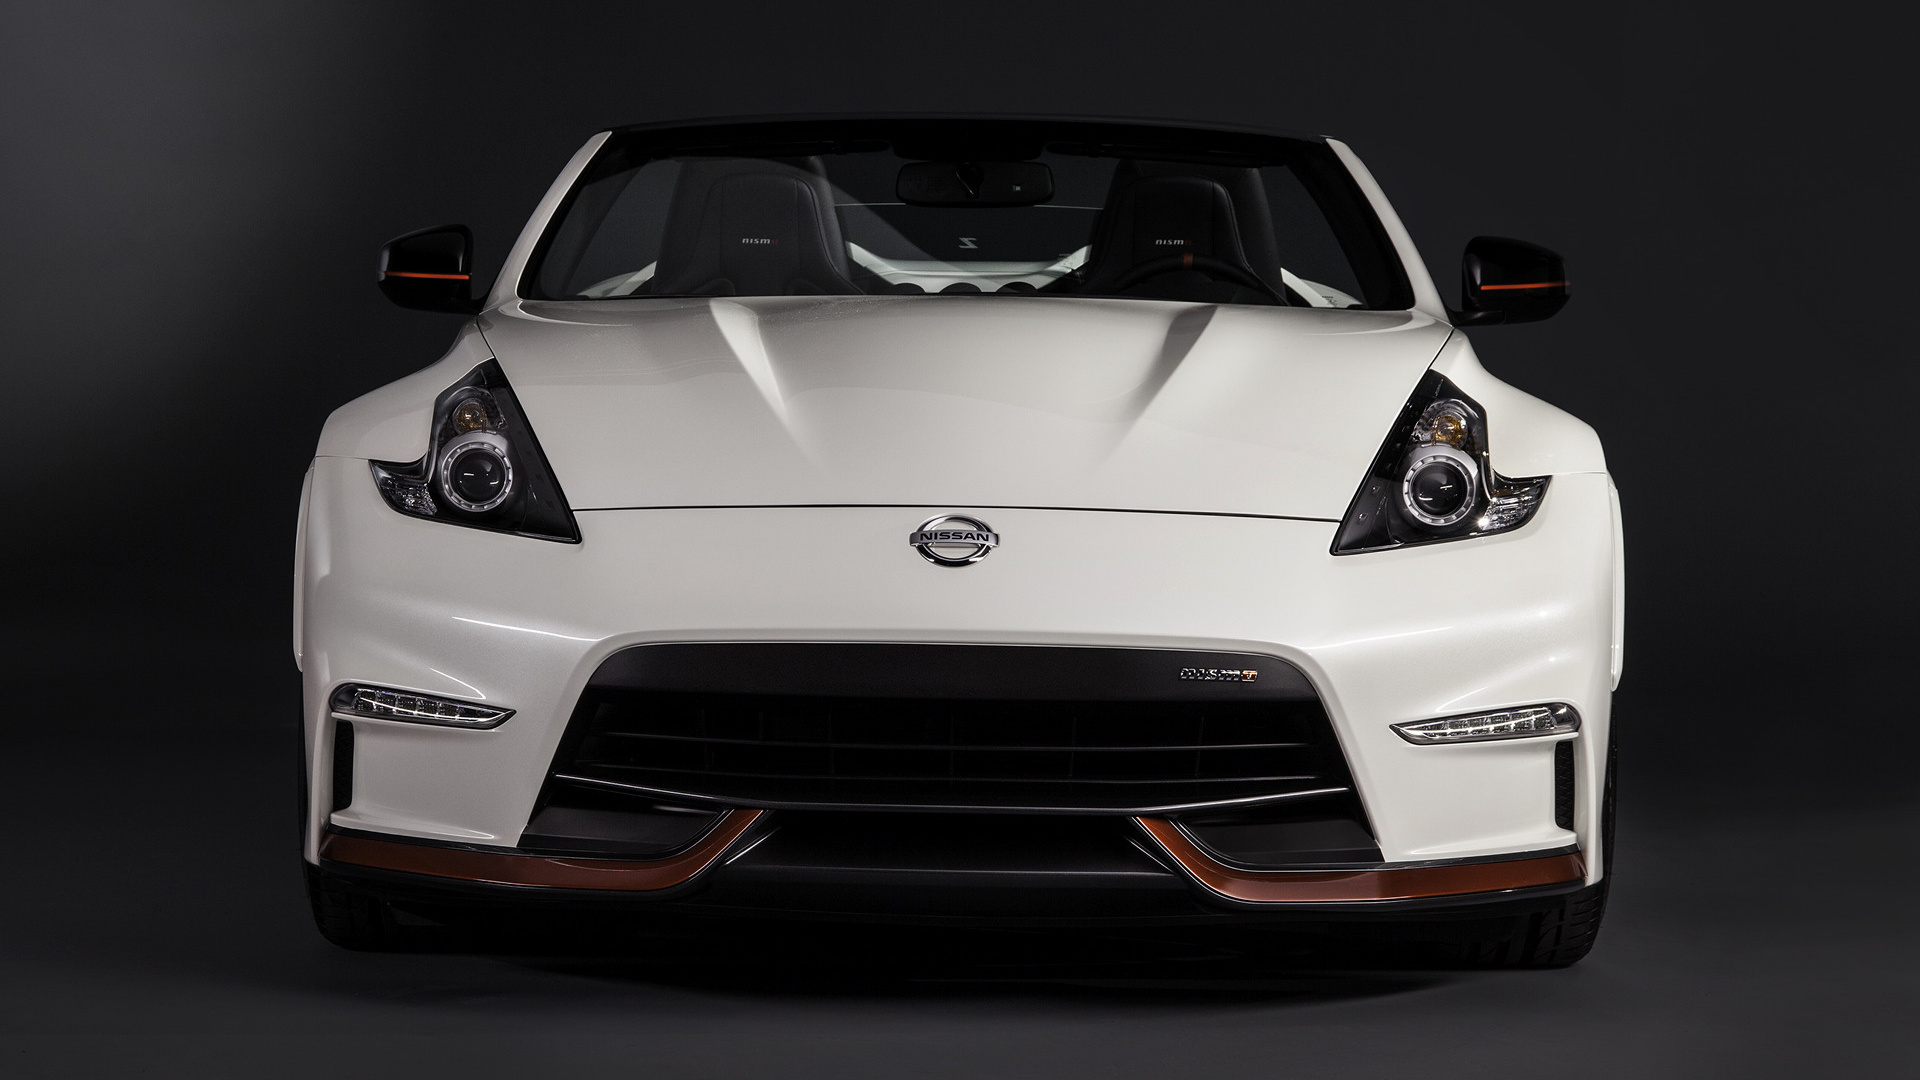 Download 1920x1080 Wallpaper Front 2019 Nissan 370z Nismo Full Images, Photos, Reviews